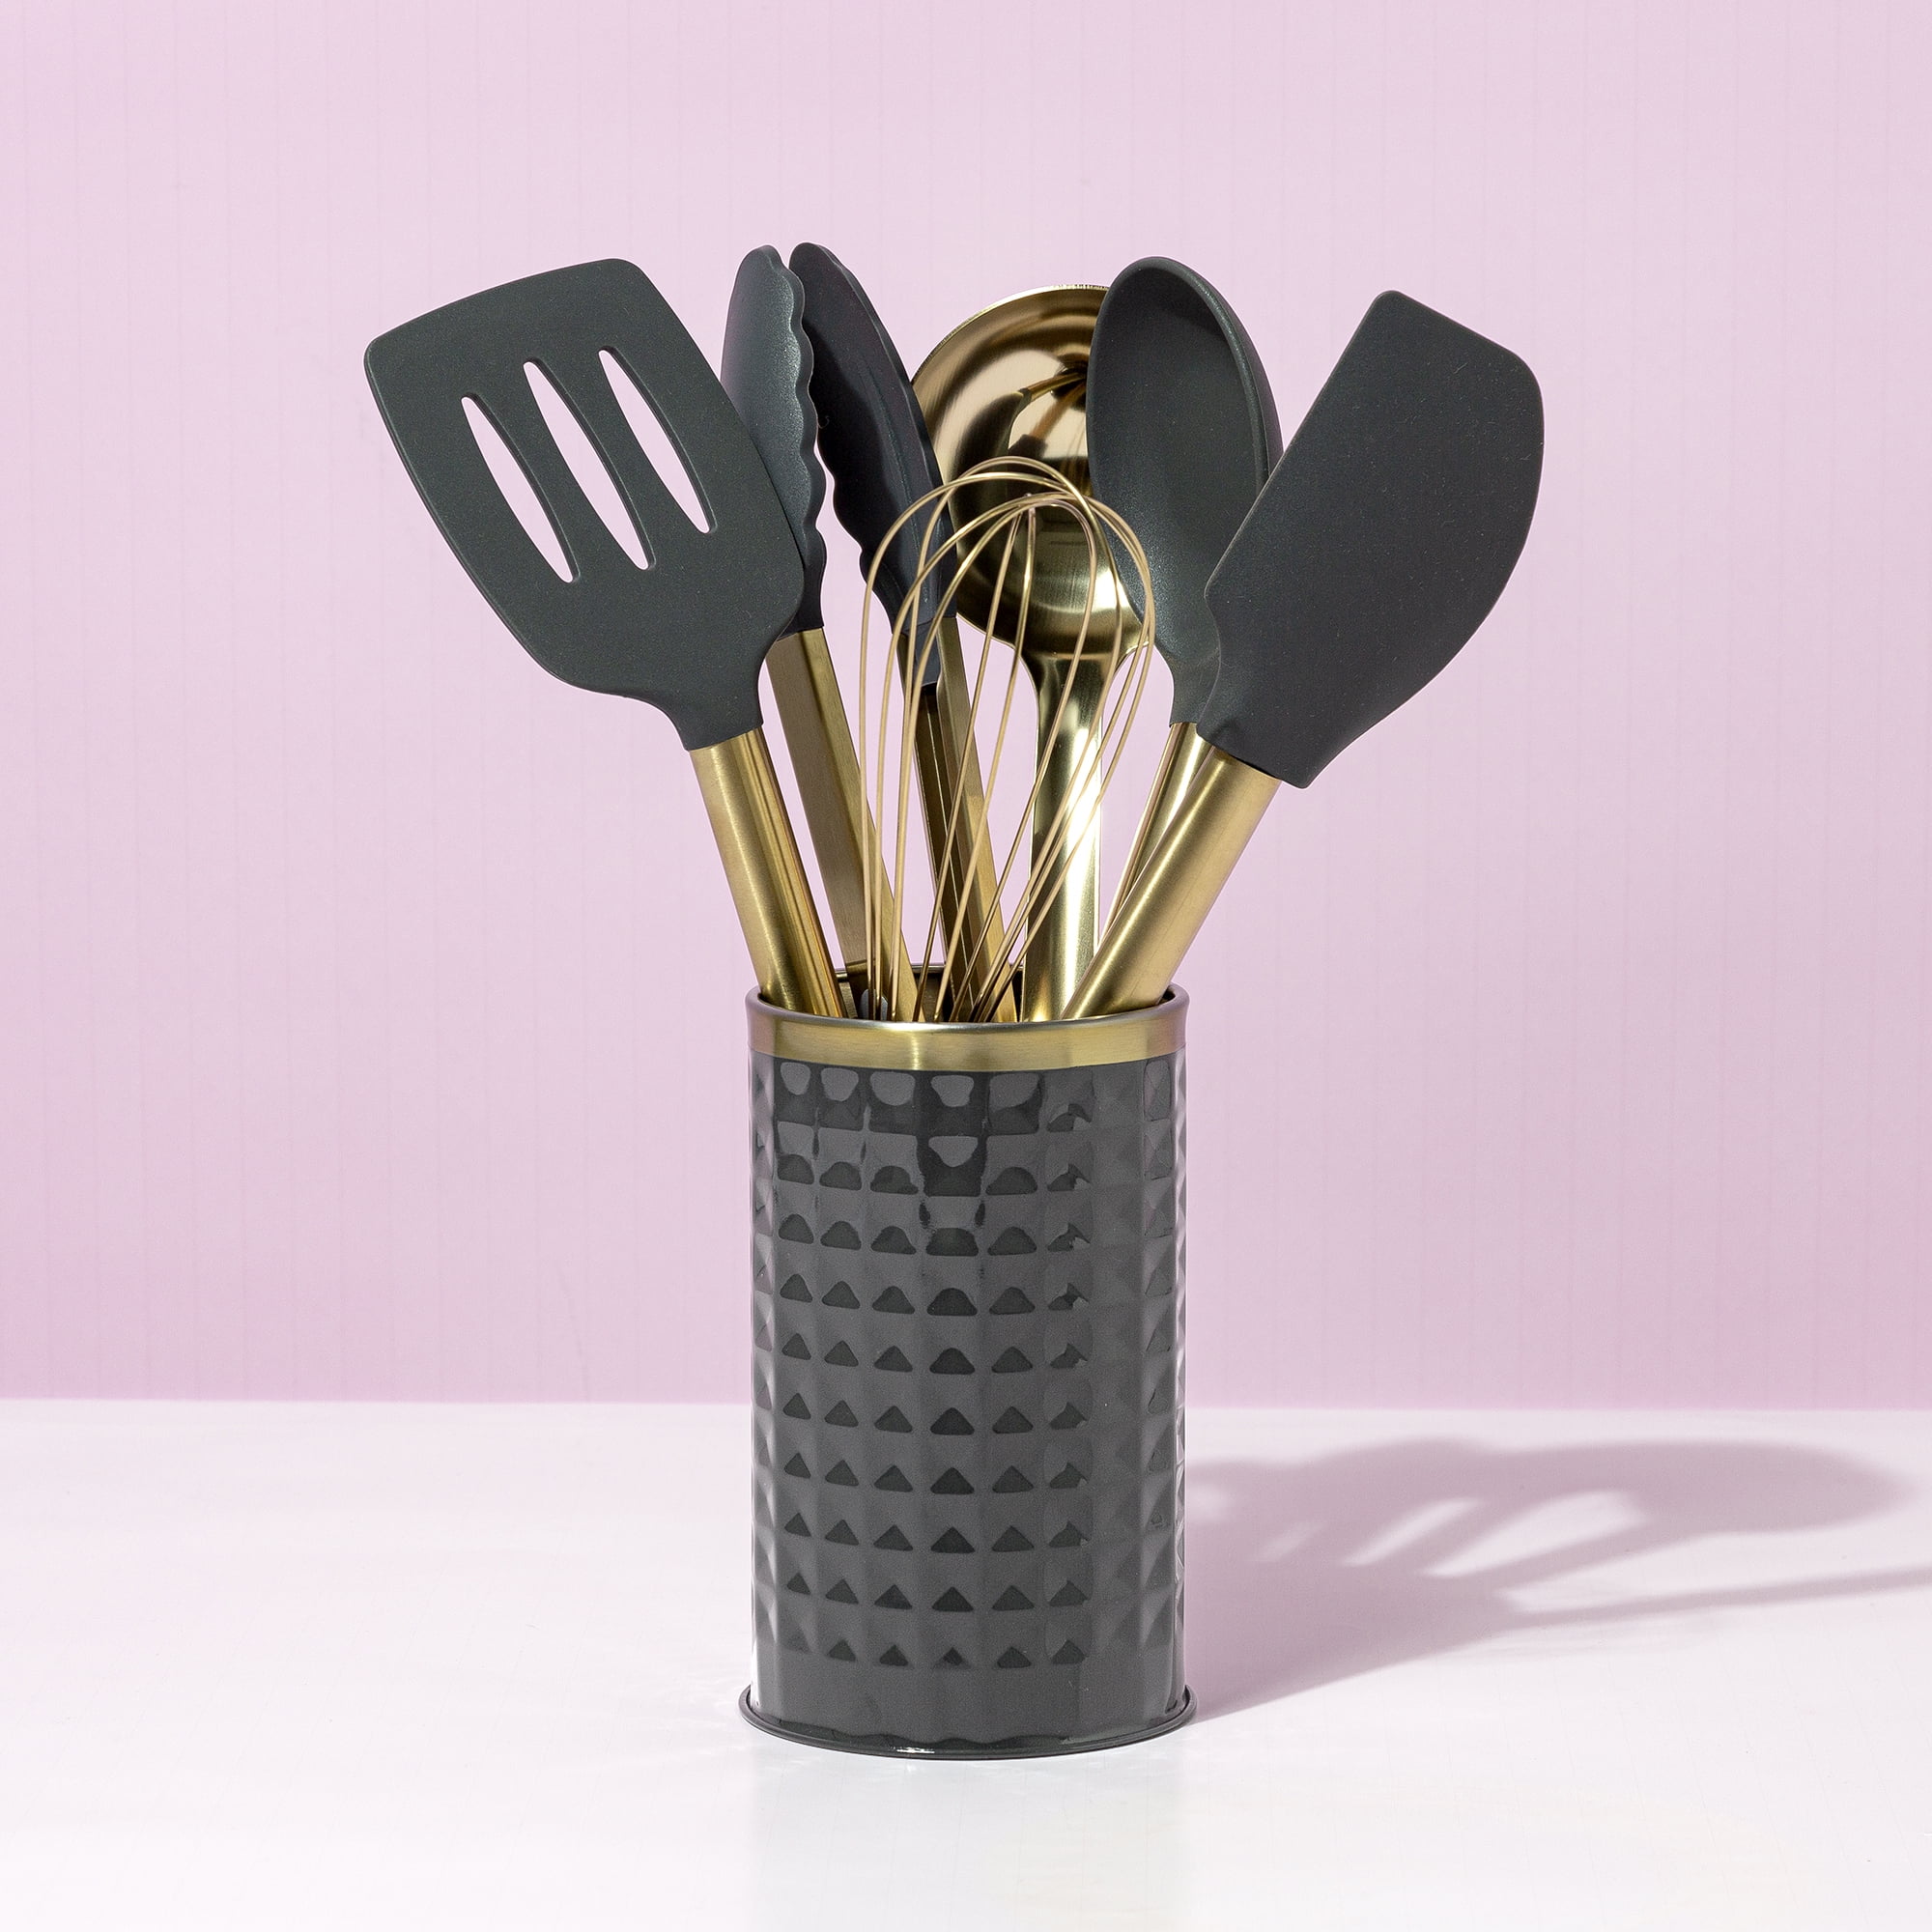 TikTok loves this chic cooking utensils set for only $30 on